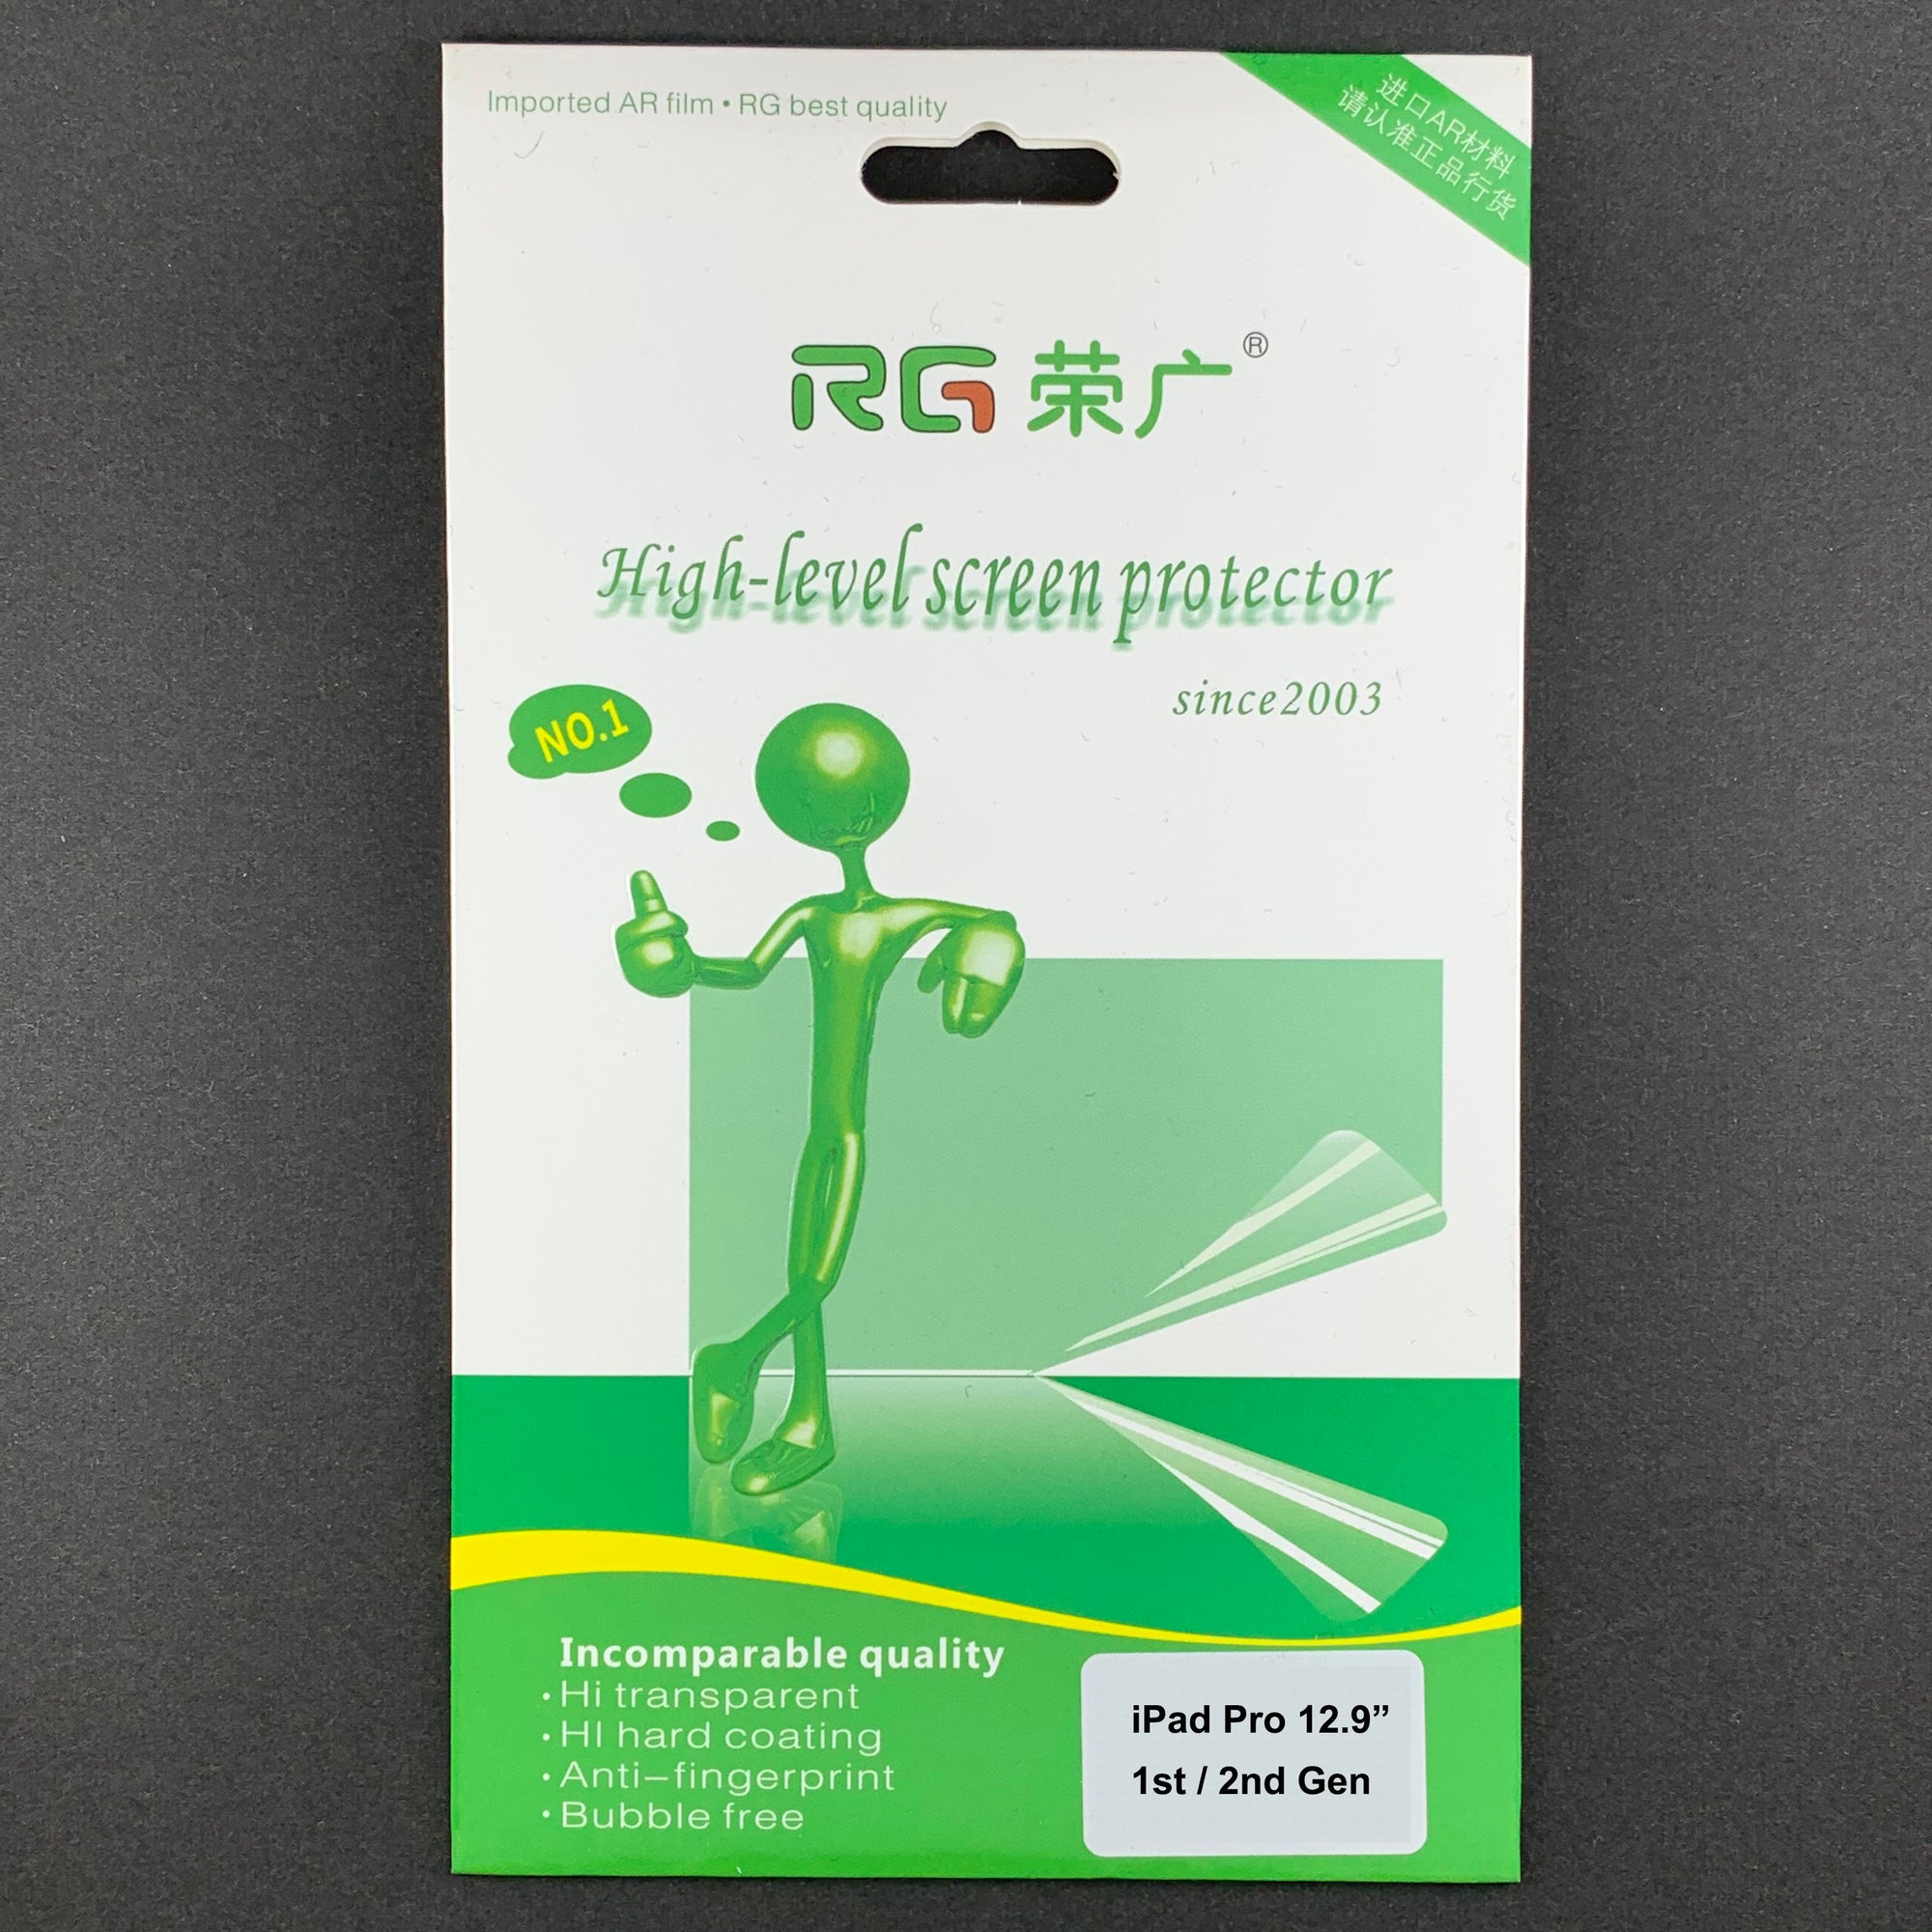 RG Professional Soft Film Screen Protector for iPad Pro 12.9" 1st / 2nd Gen (MATTE, 2-PACK)